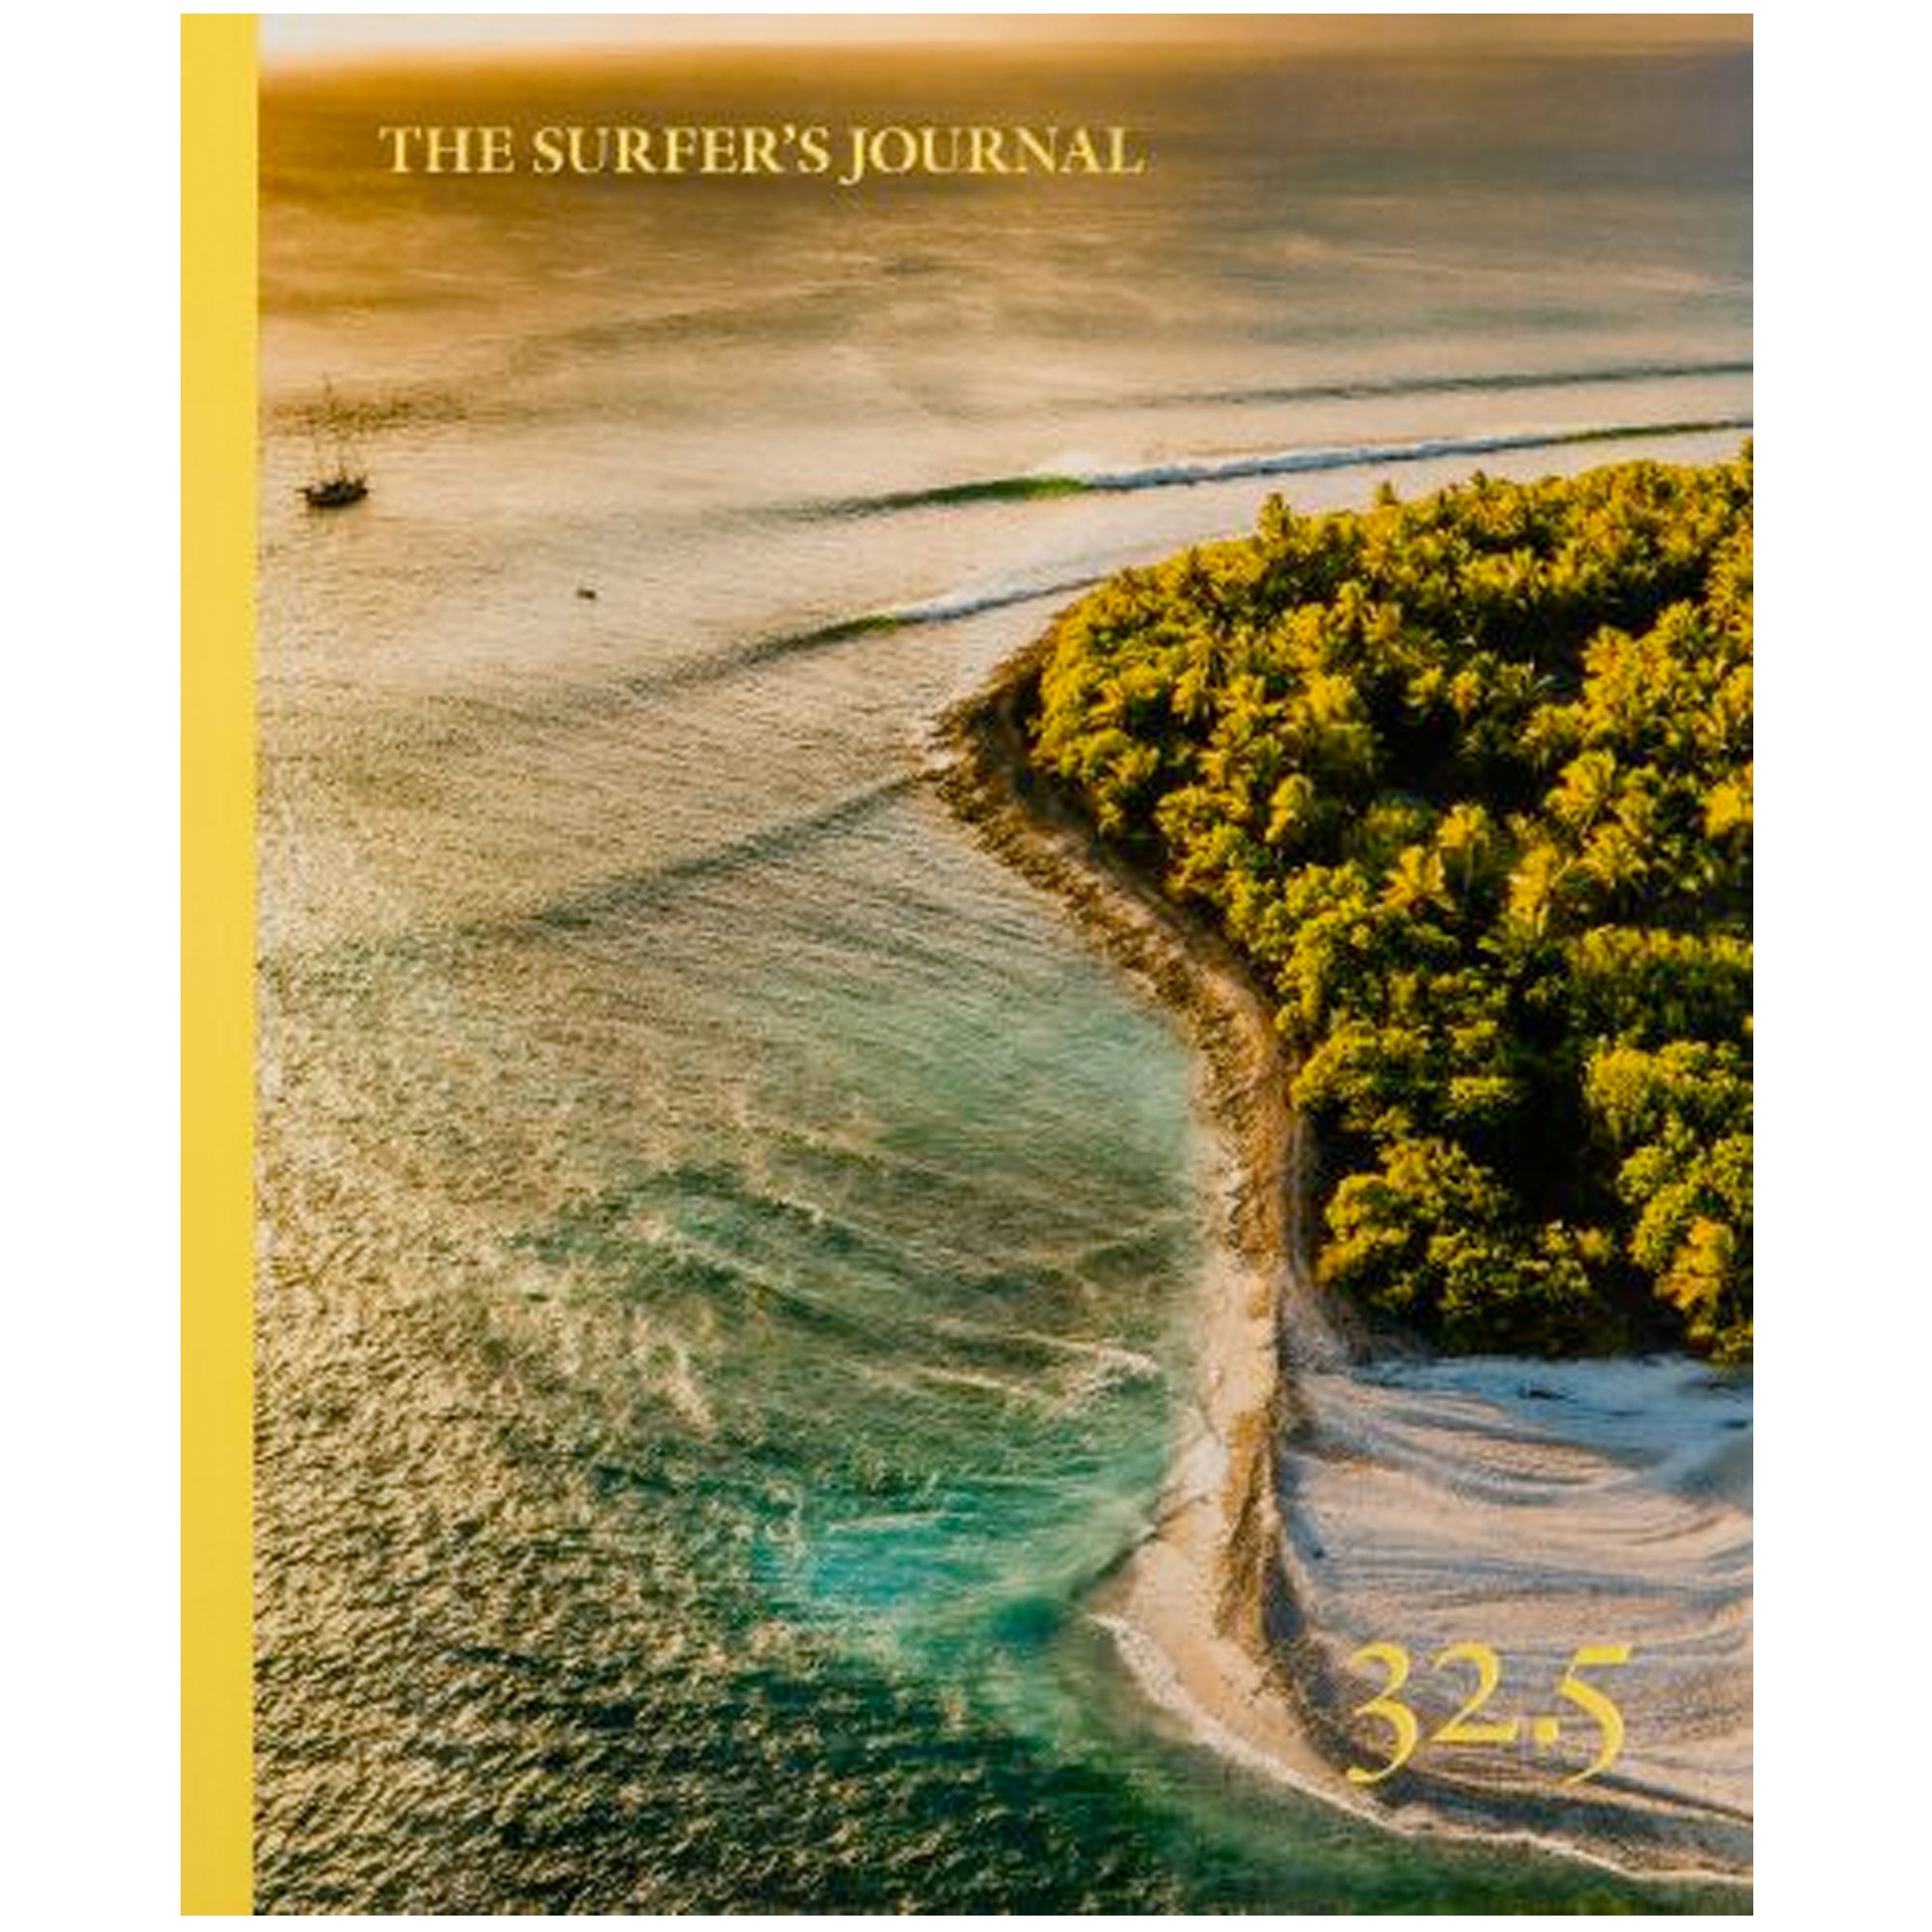 The Surfer Journal #32.5